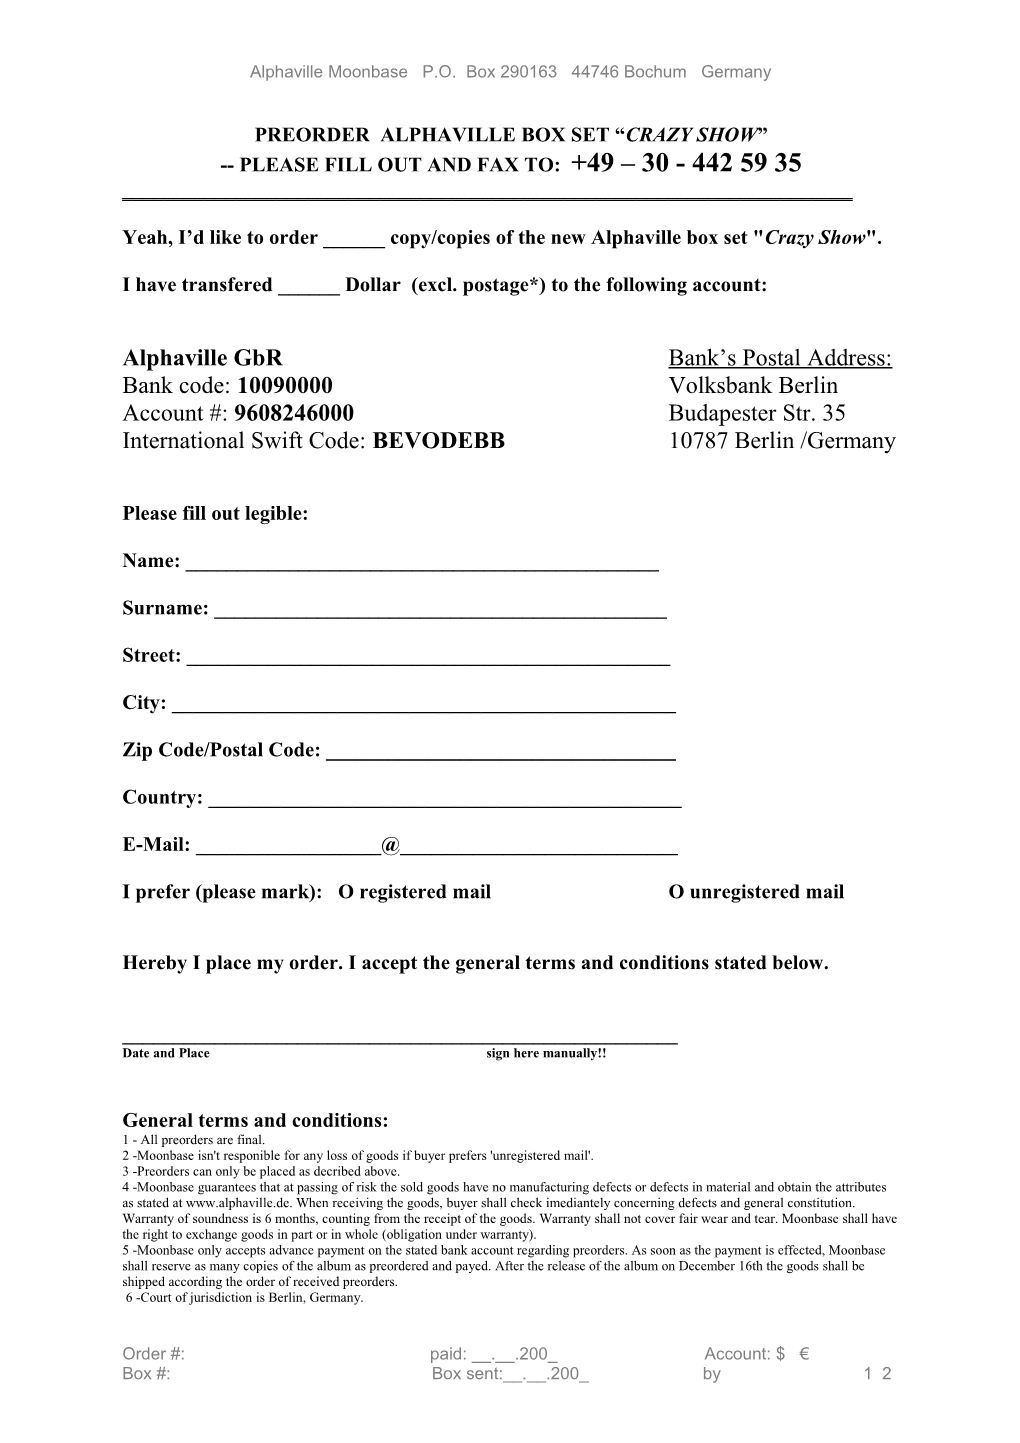 Prorder Please Fill out and Fax To: 0049 30 - 442 59 35